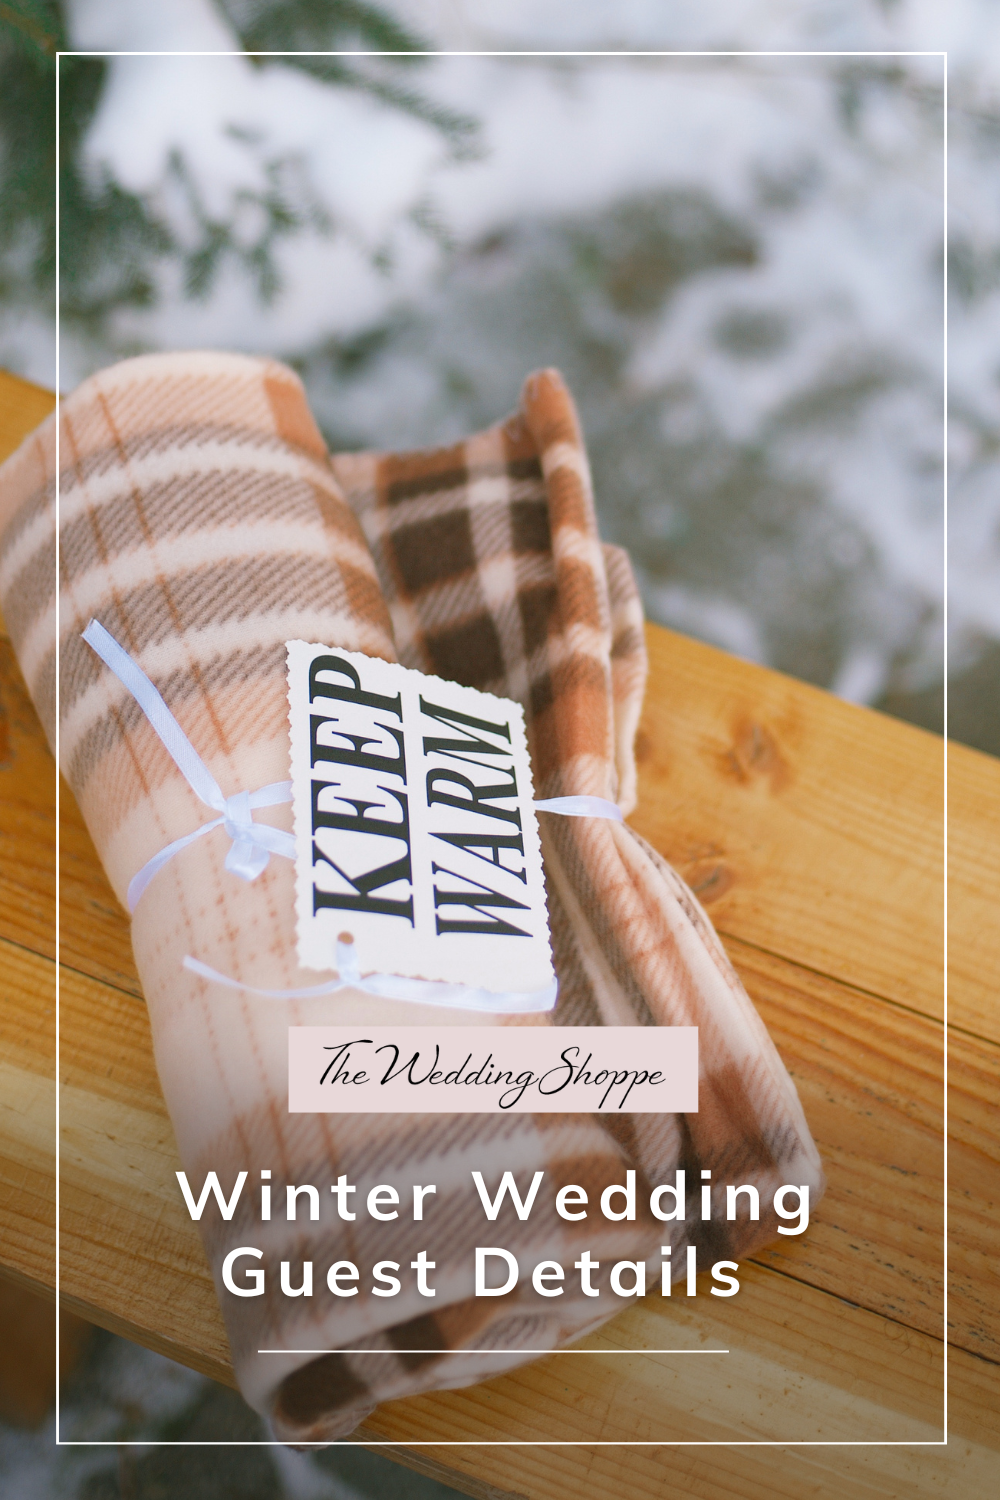 blog post graphic for "Winter Wedding Guest Details"